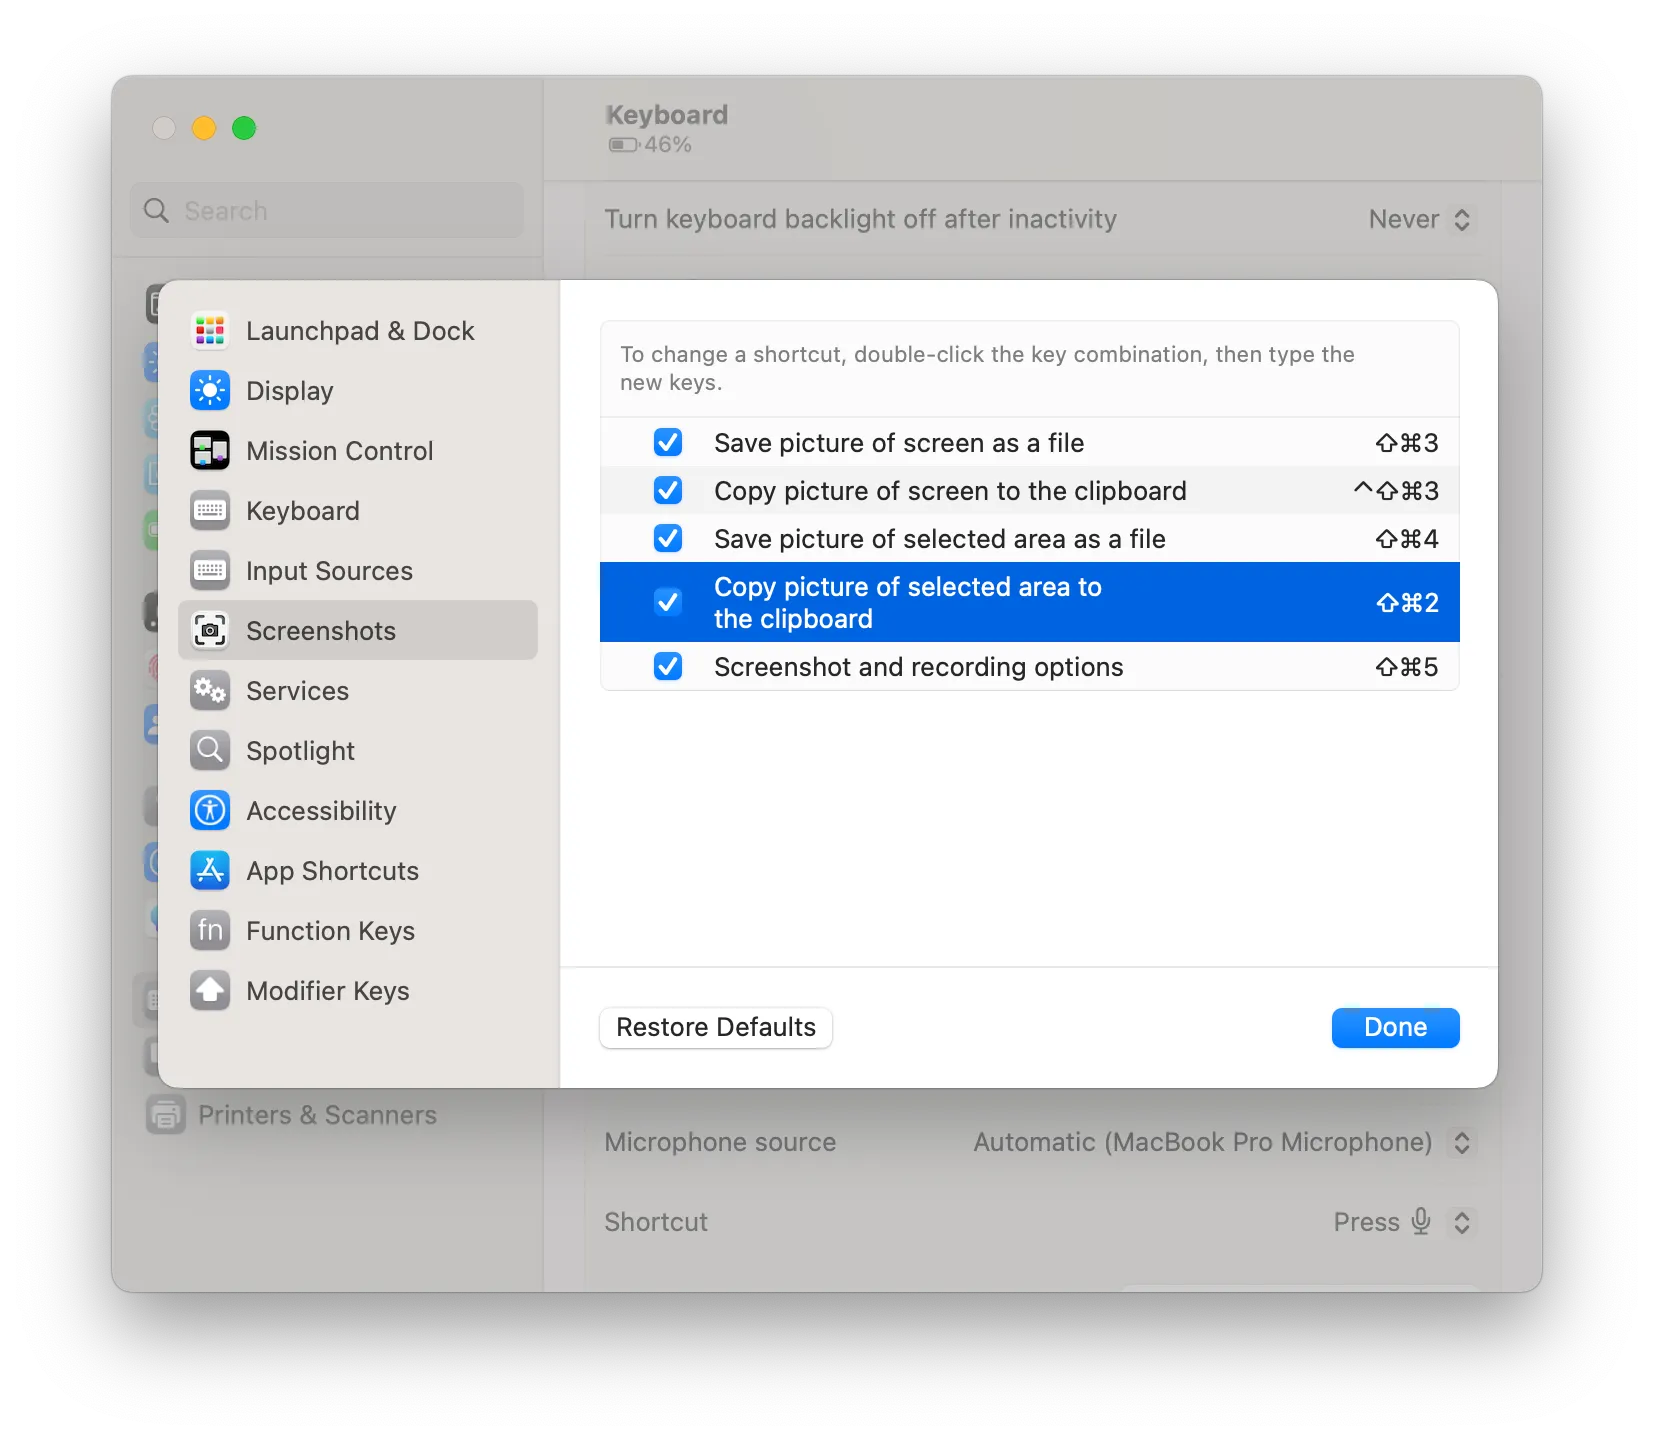 Add coping screenshot to the clipboard on MacOS